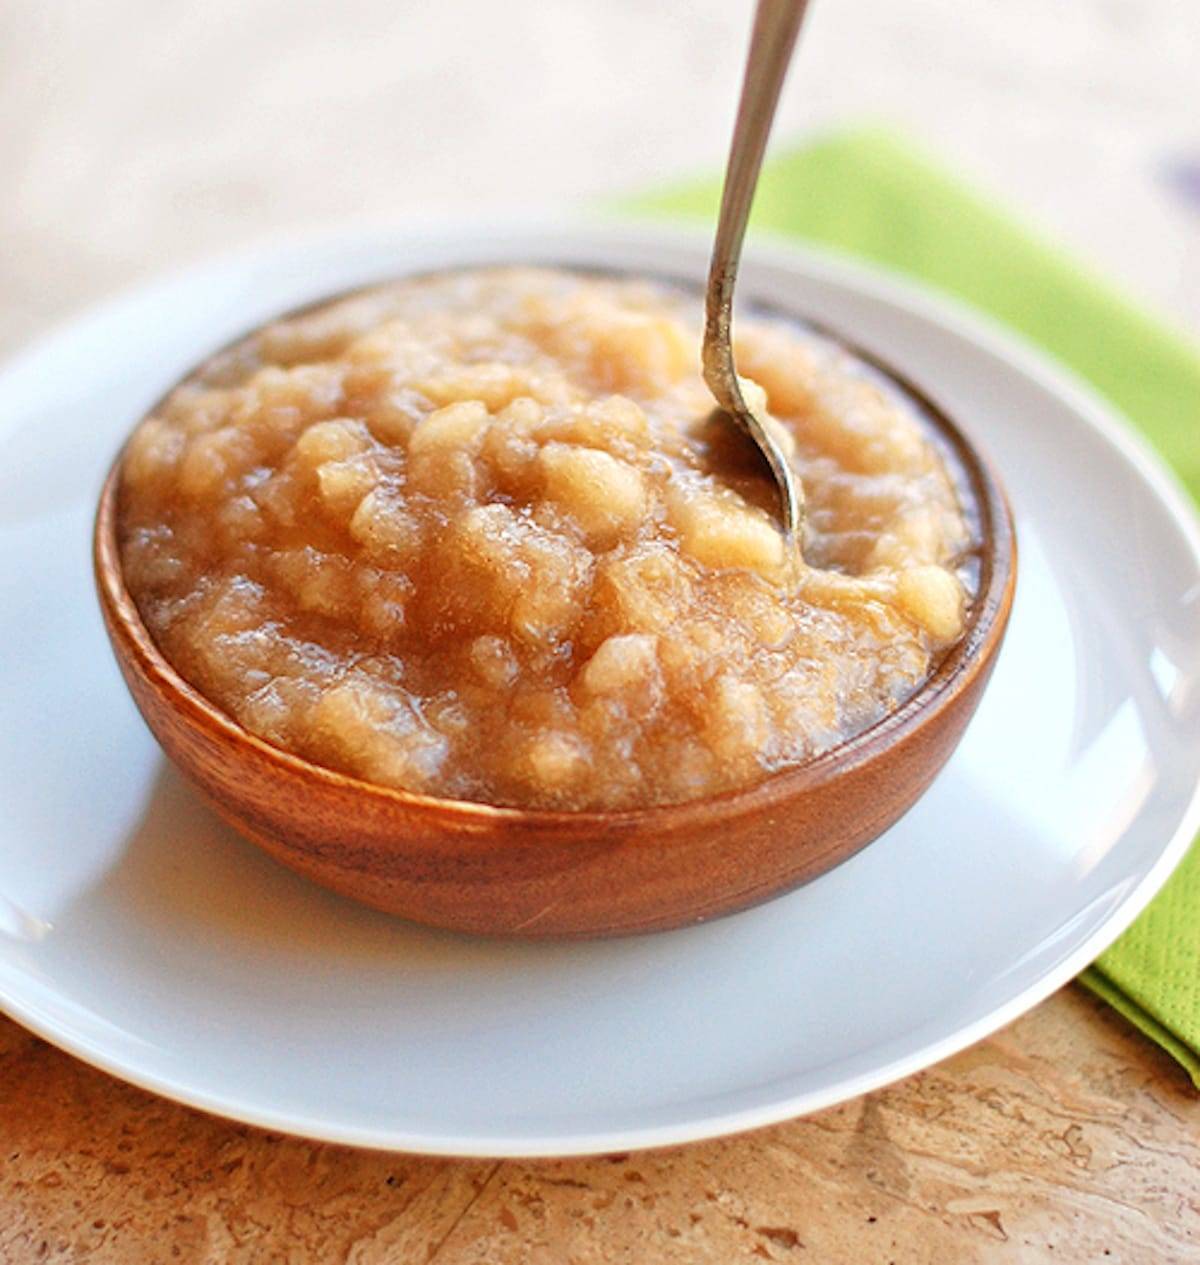 Homemade applesauce in a bowl with a spoon.